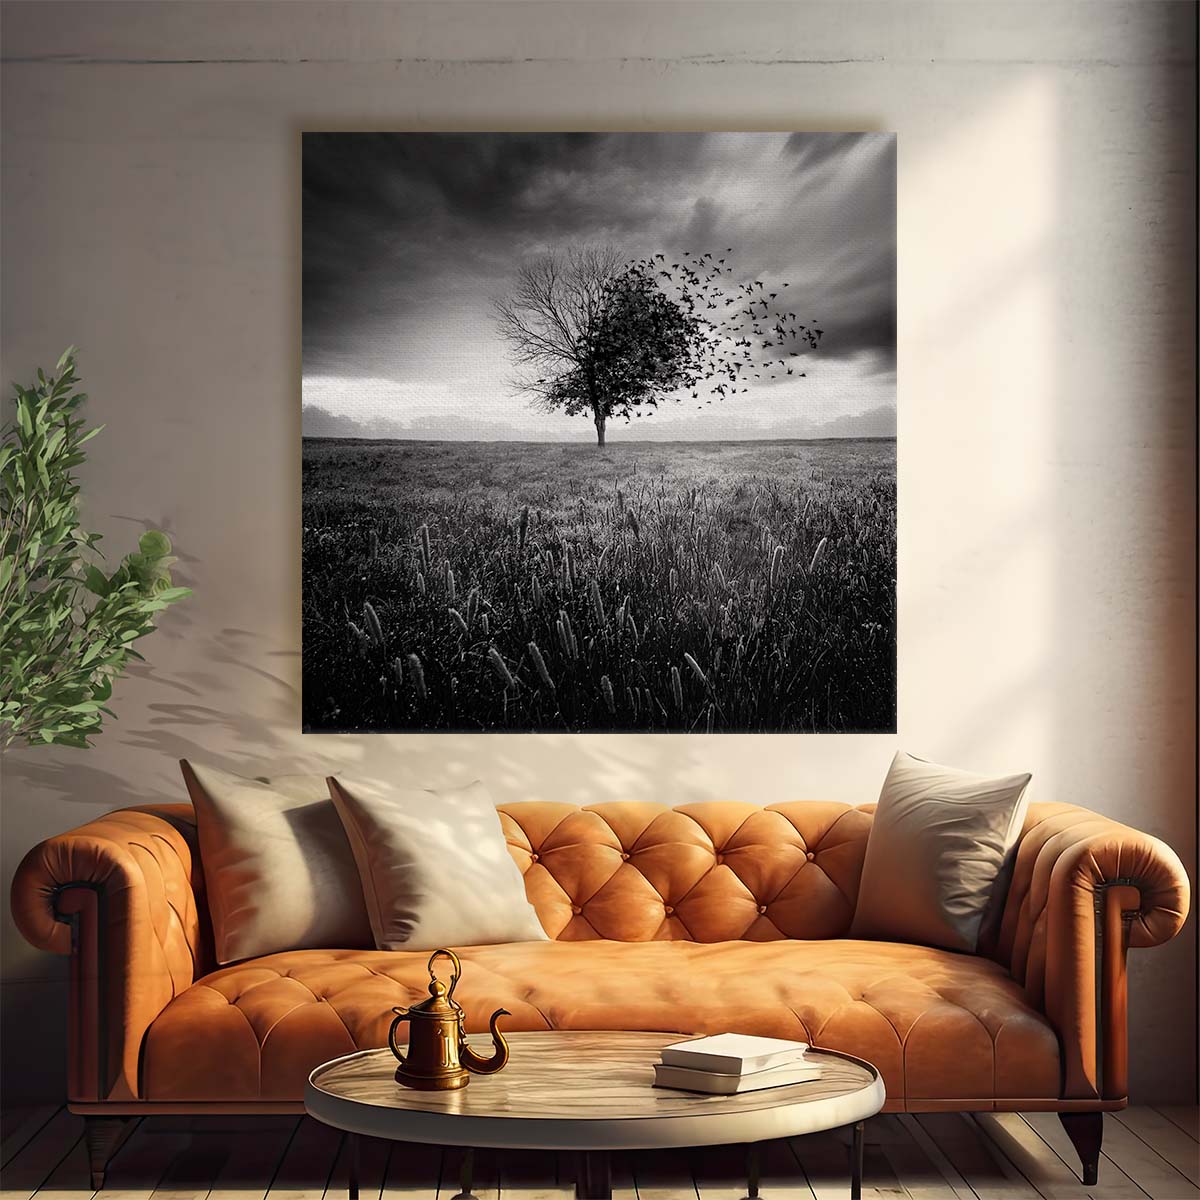 Autumnal Solitude in Monochrome Landscape Photography Wall Art by Luxuriance Designs. Made in USA.